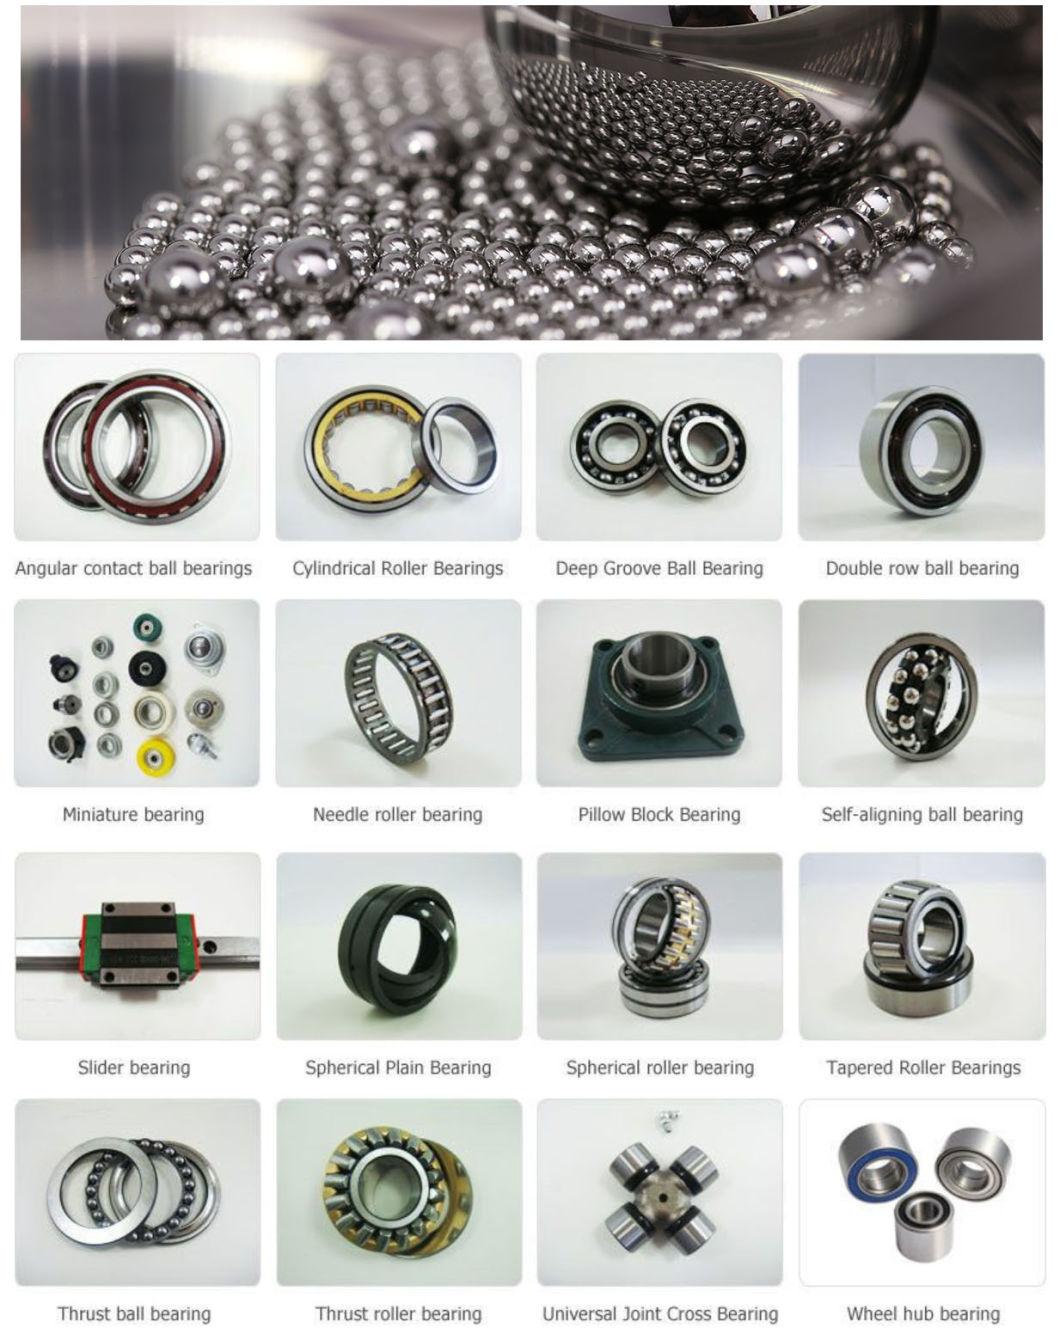 Suitable for Automobile Needle Roller Thrust Bearing with High Grade